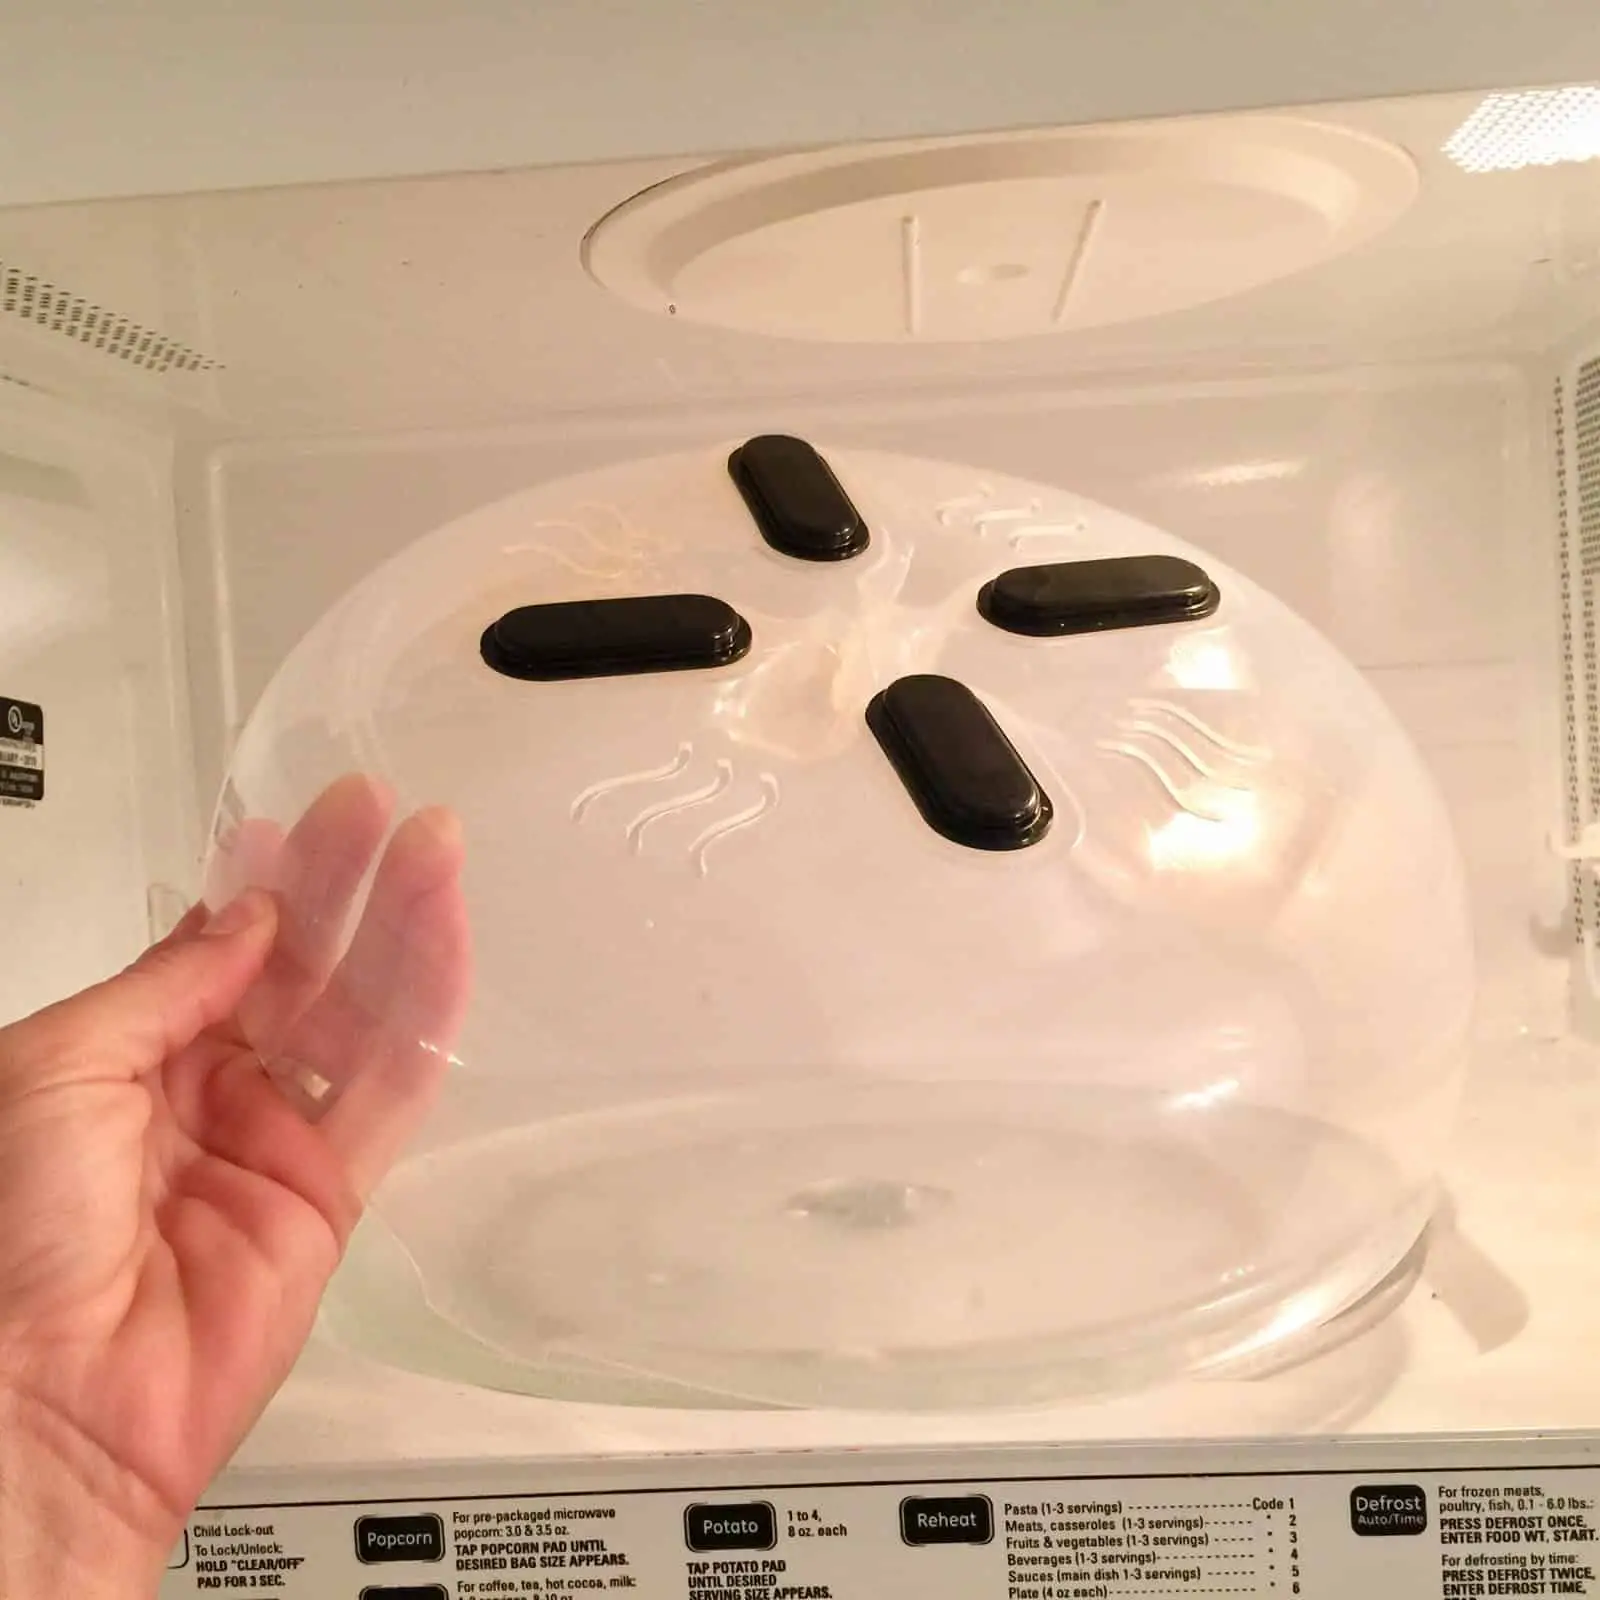 microwave cover, prevent splatters, cover foods in the microwave